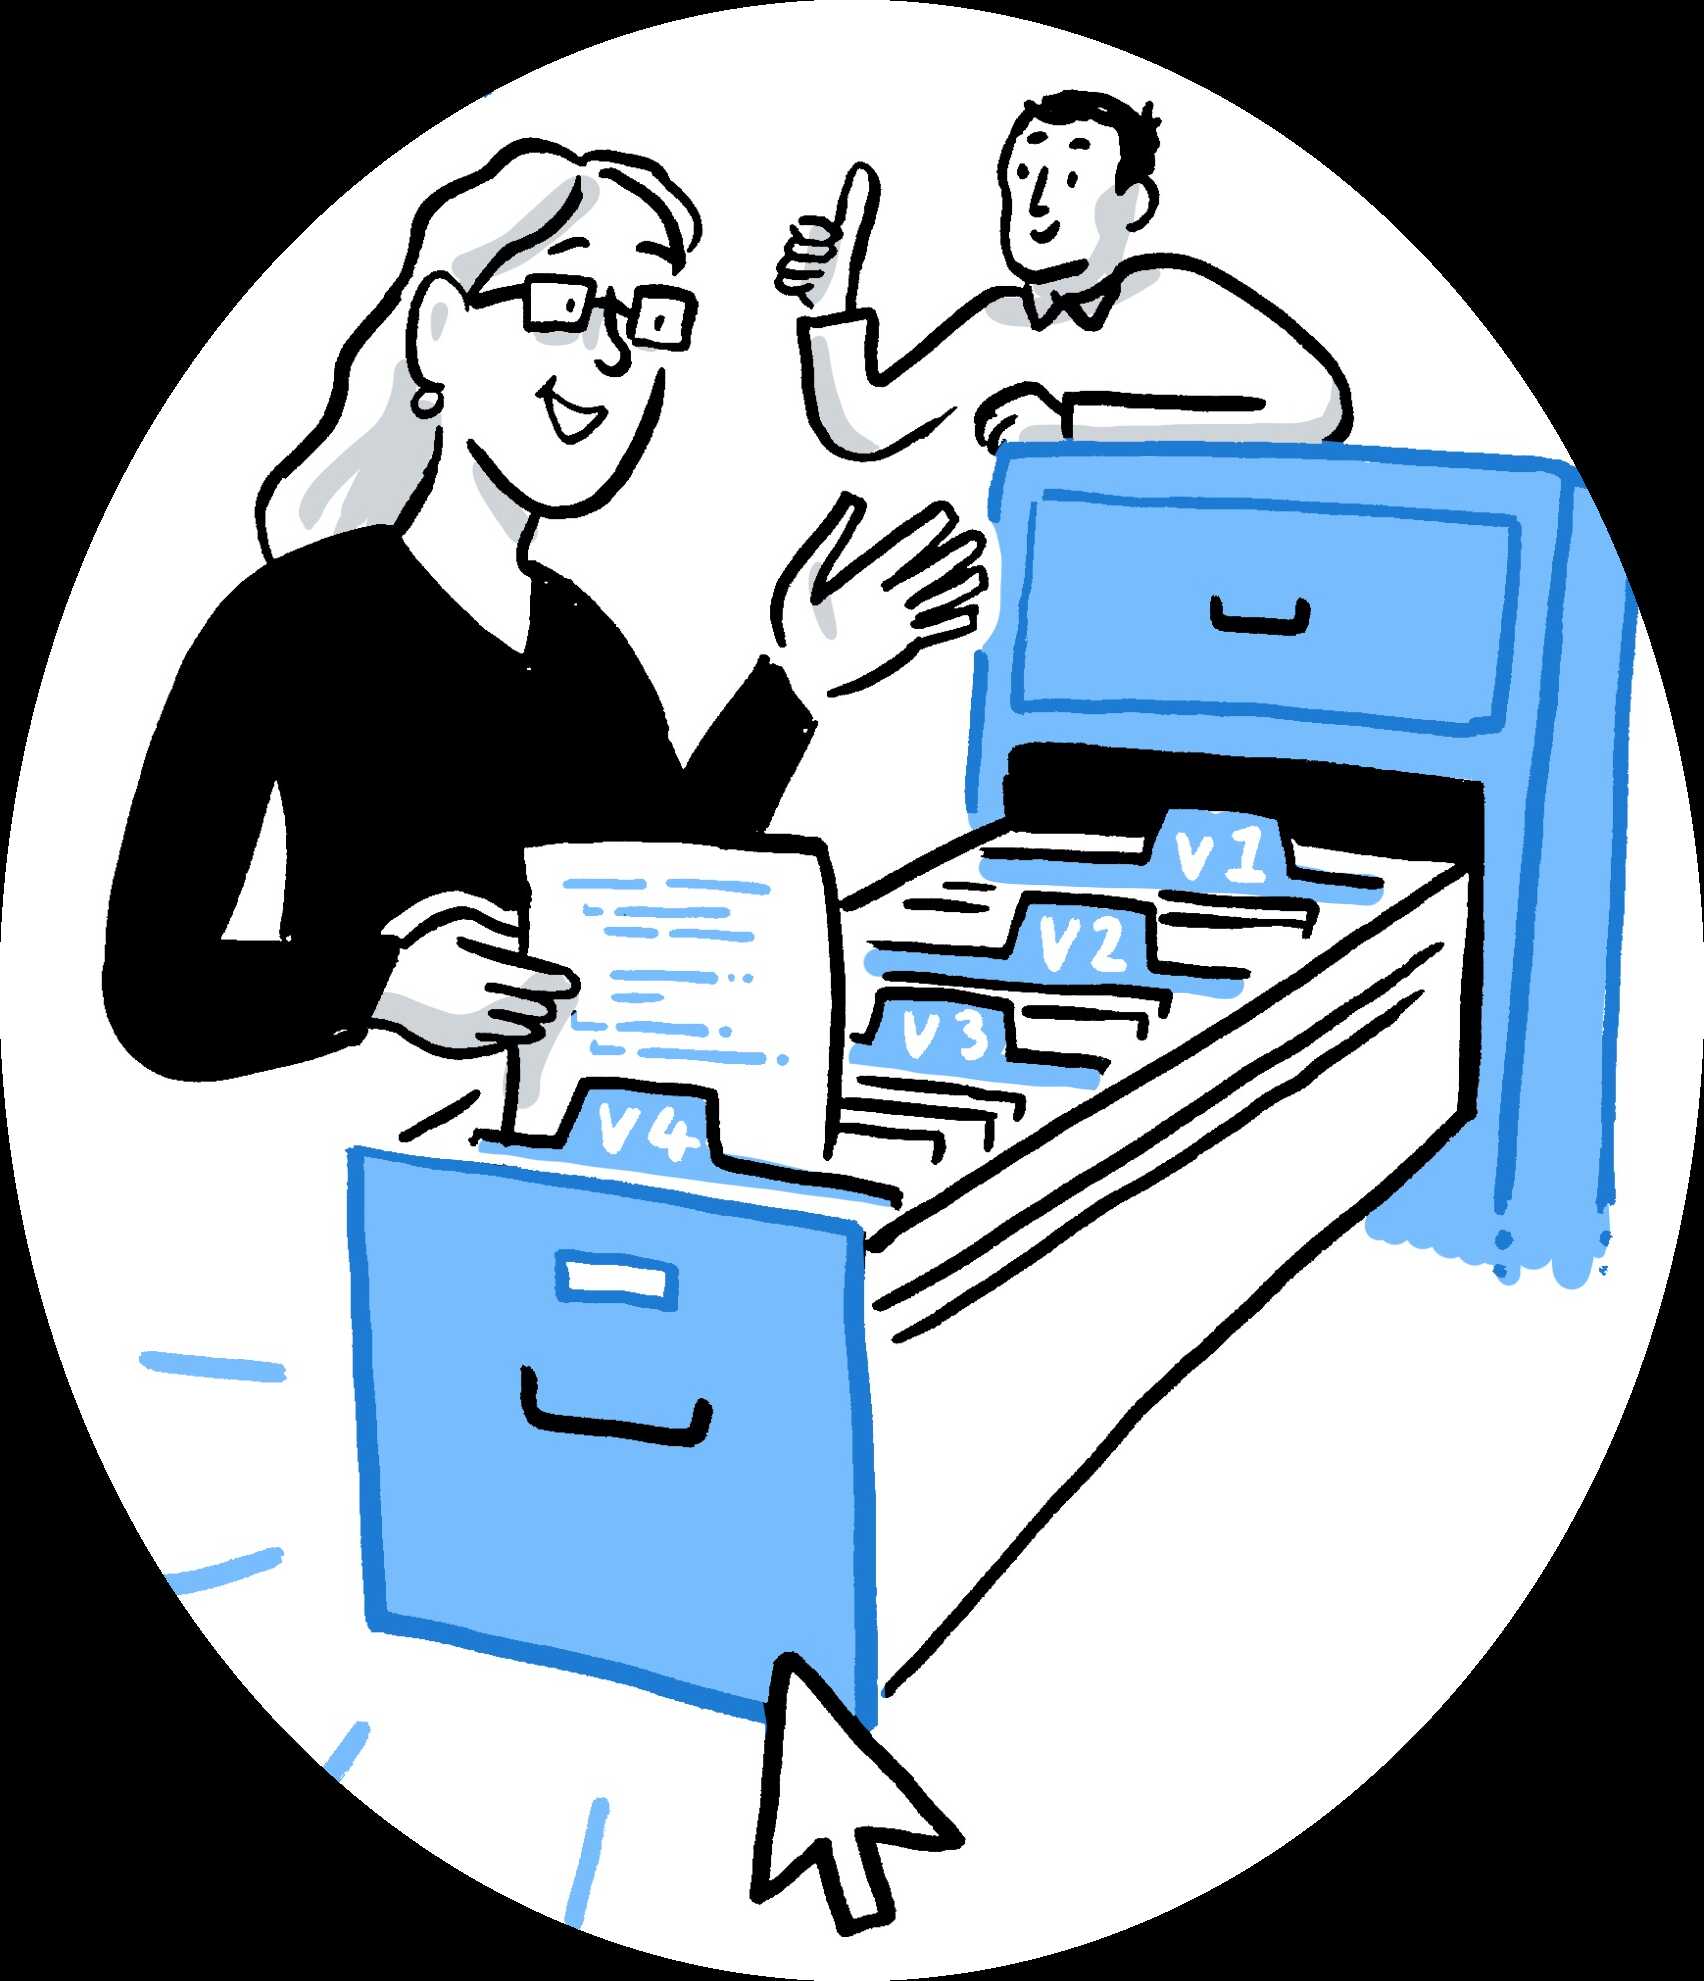 Cartoon-like sketch of a woman looking through a big file drawer, where documents are arranged systematically indicated by versions. She is smiling and waving at her colleague who is standing next to the file drawer and seems to be checking if everything is ok - gesturing a thumbs-up.